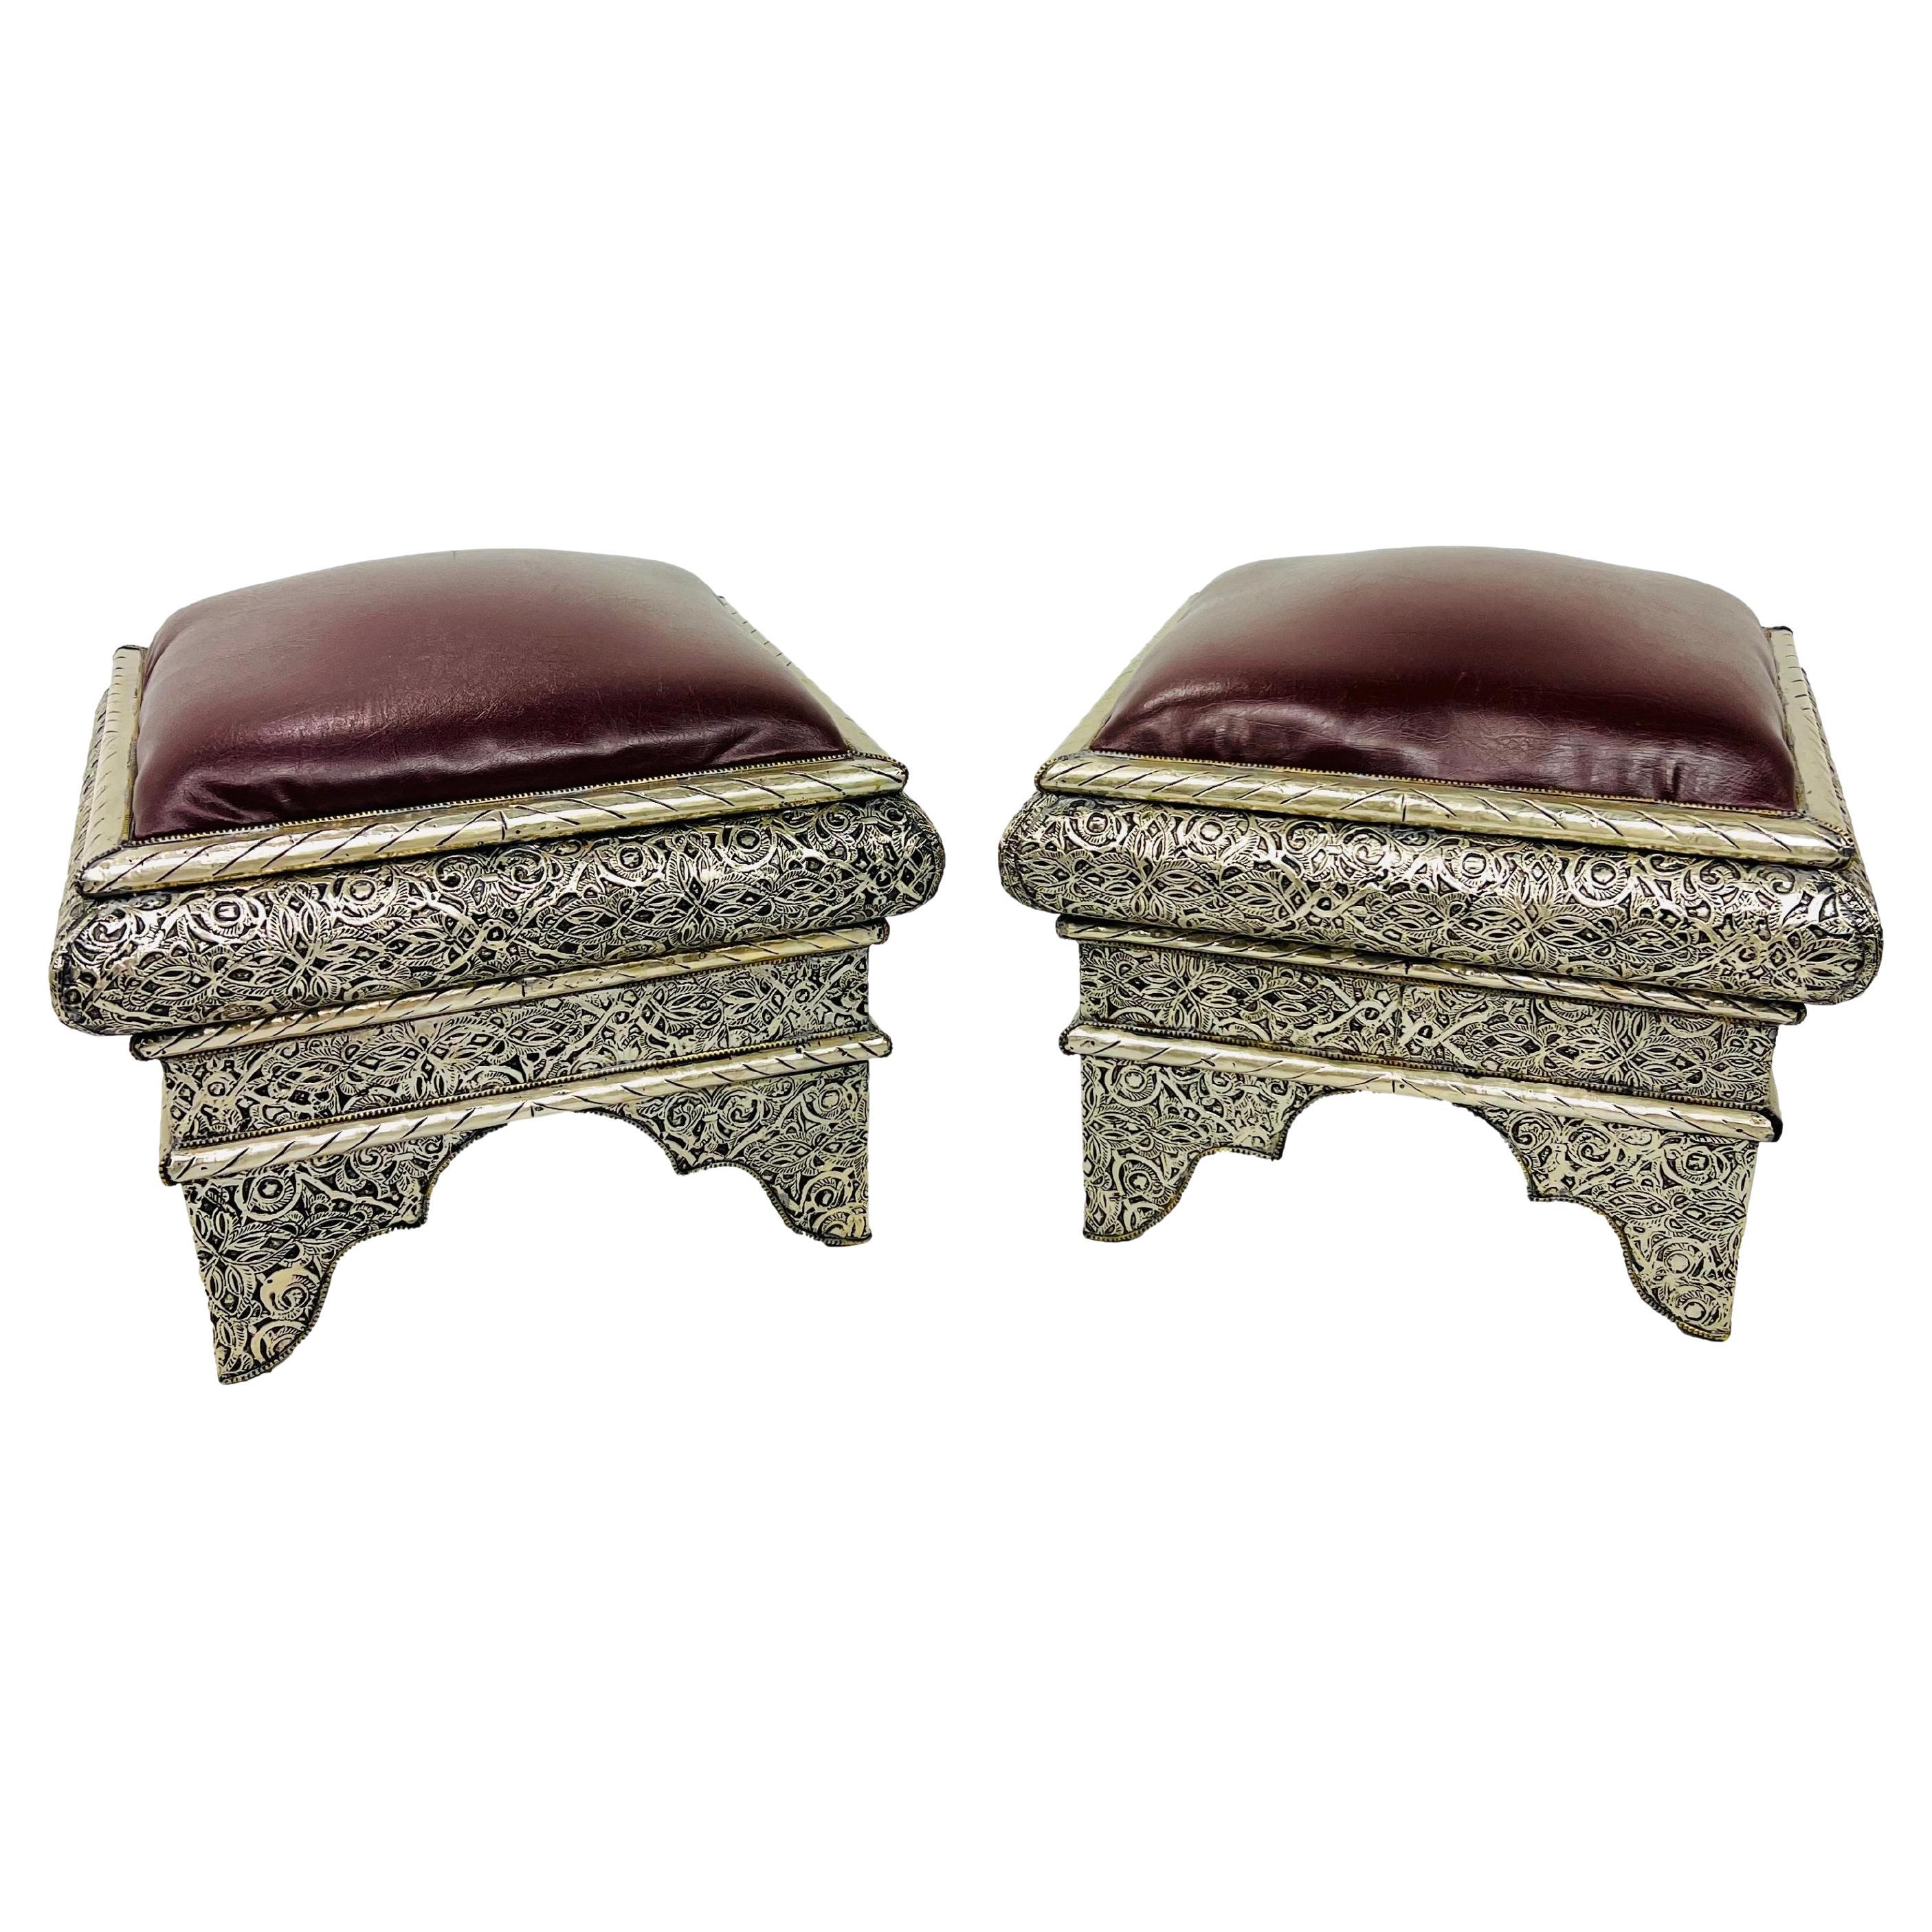 Pair of Moroccan Ottomans / Stools